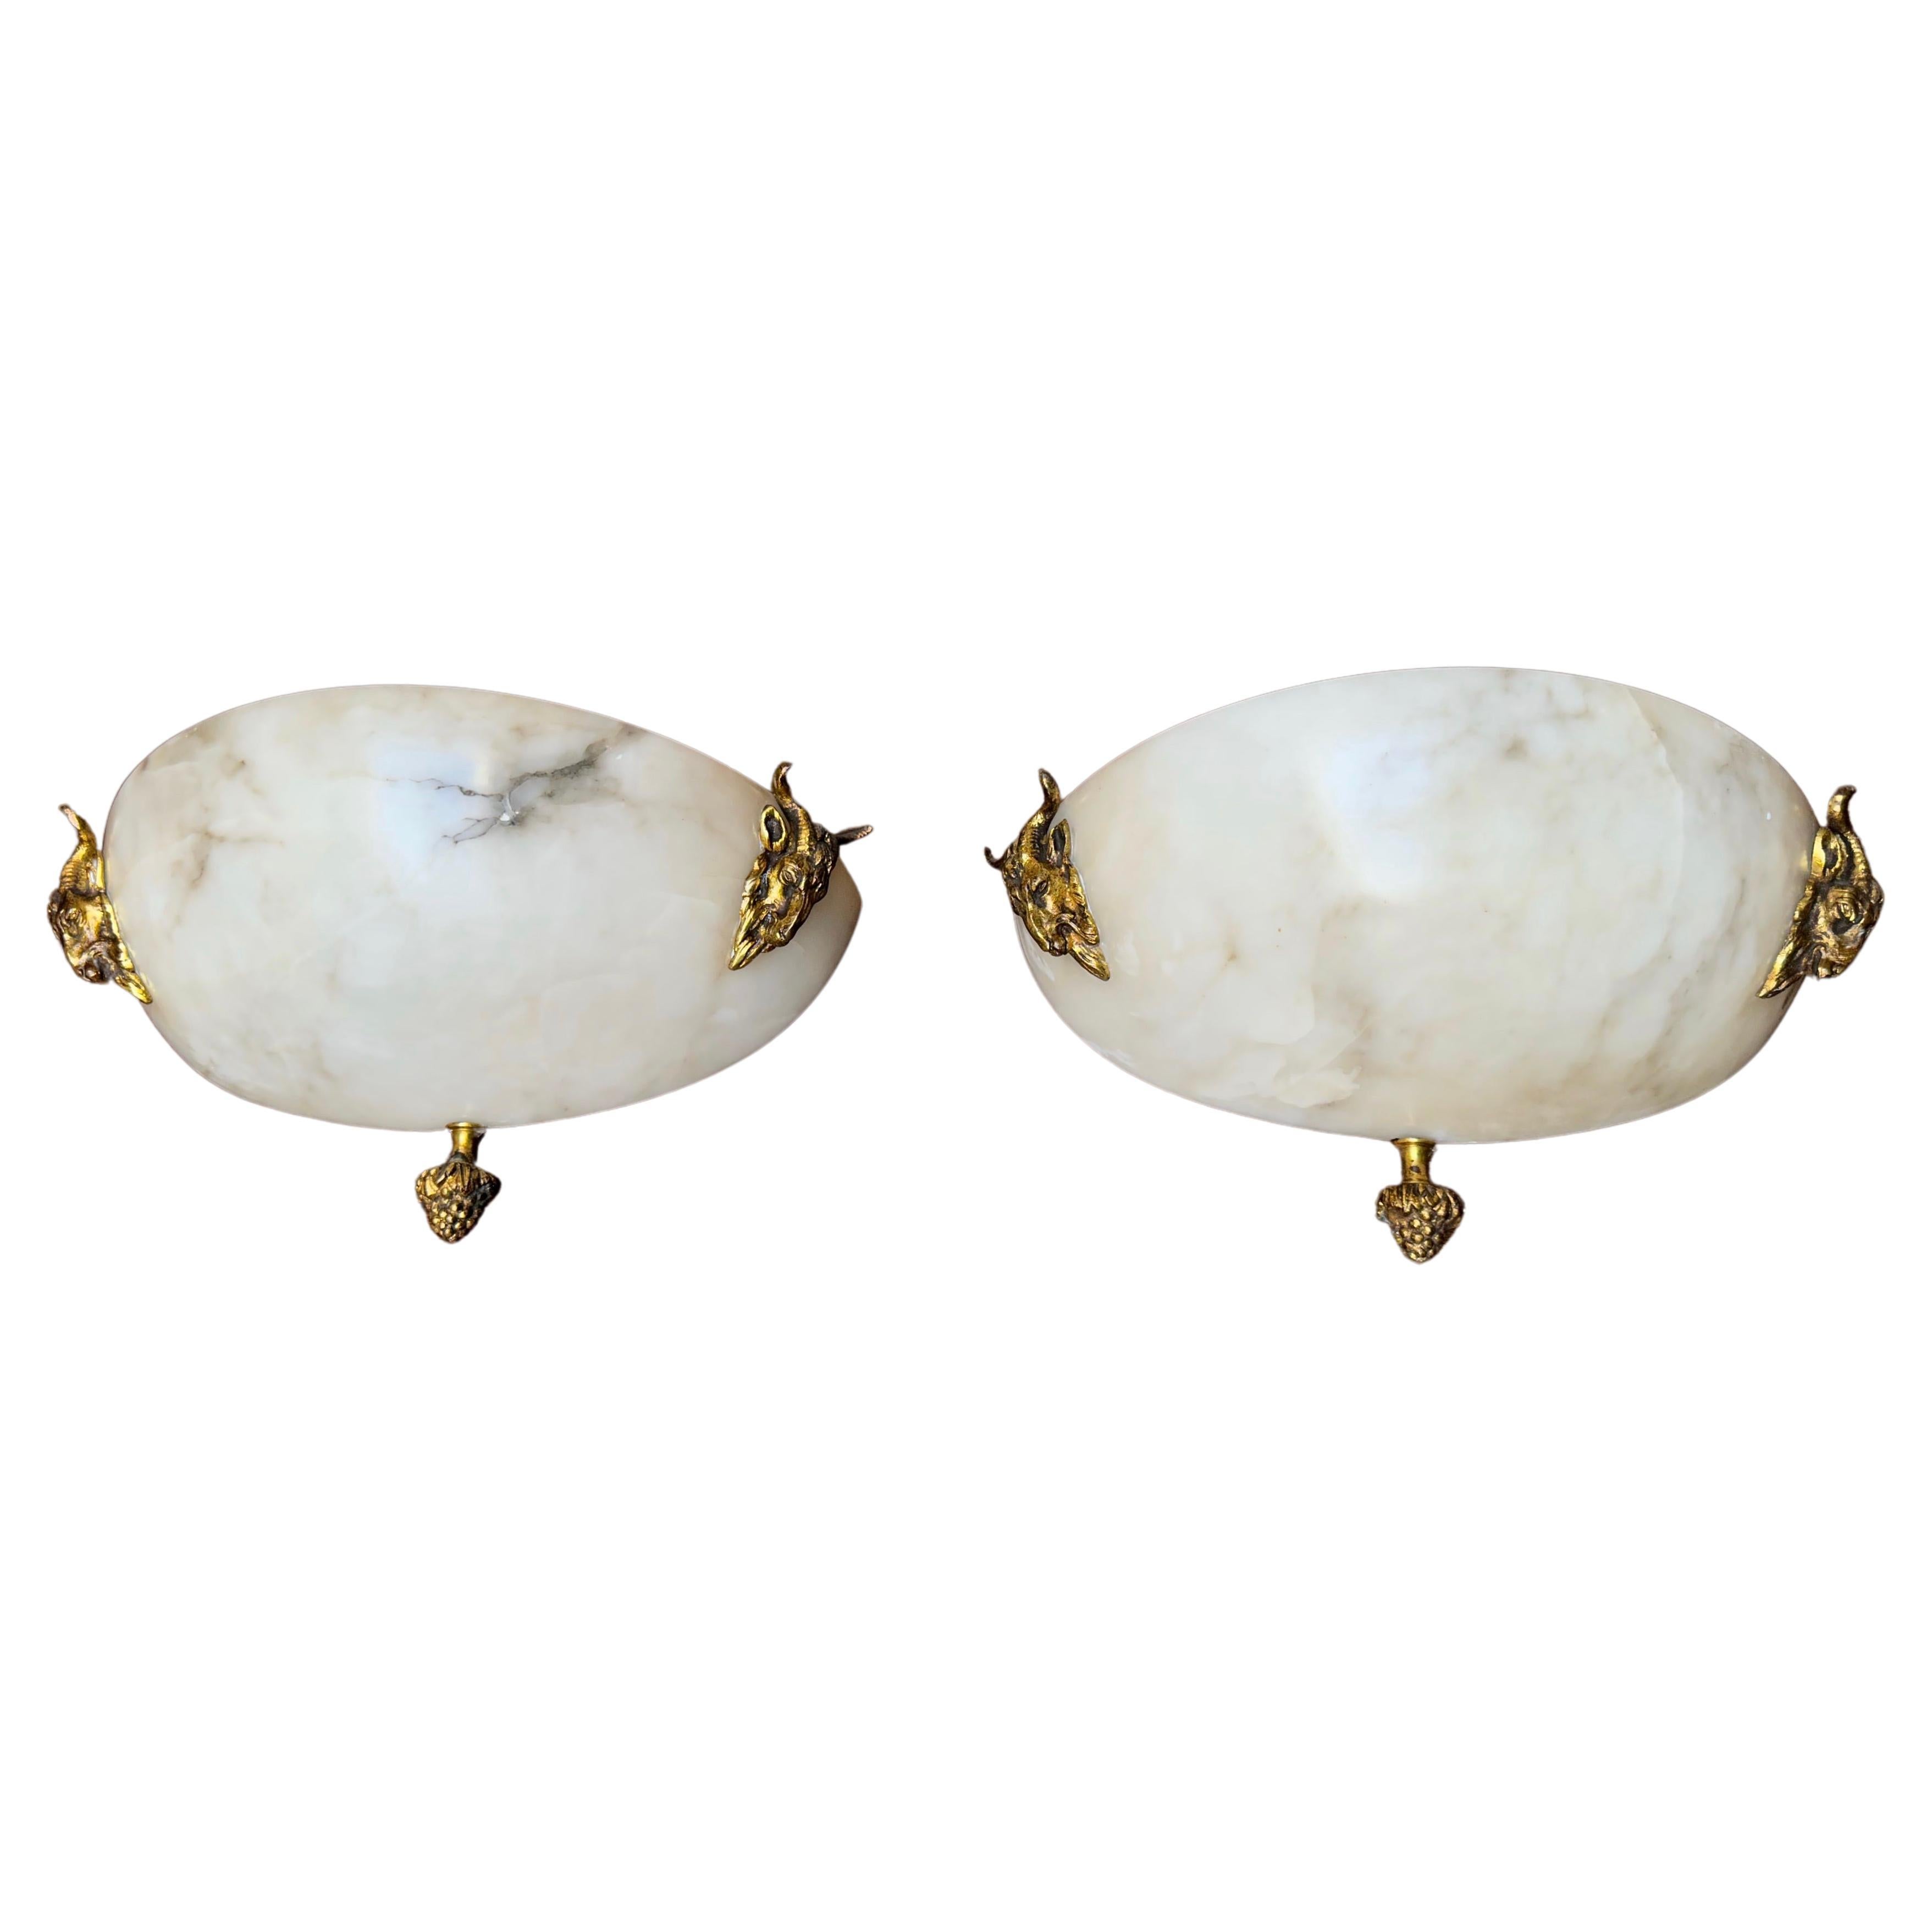 Early 1900, Antique Pair of Alabaster Wall Sconces W. Gilt Bronze Ram Sculptures For Sale